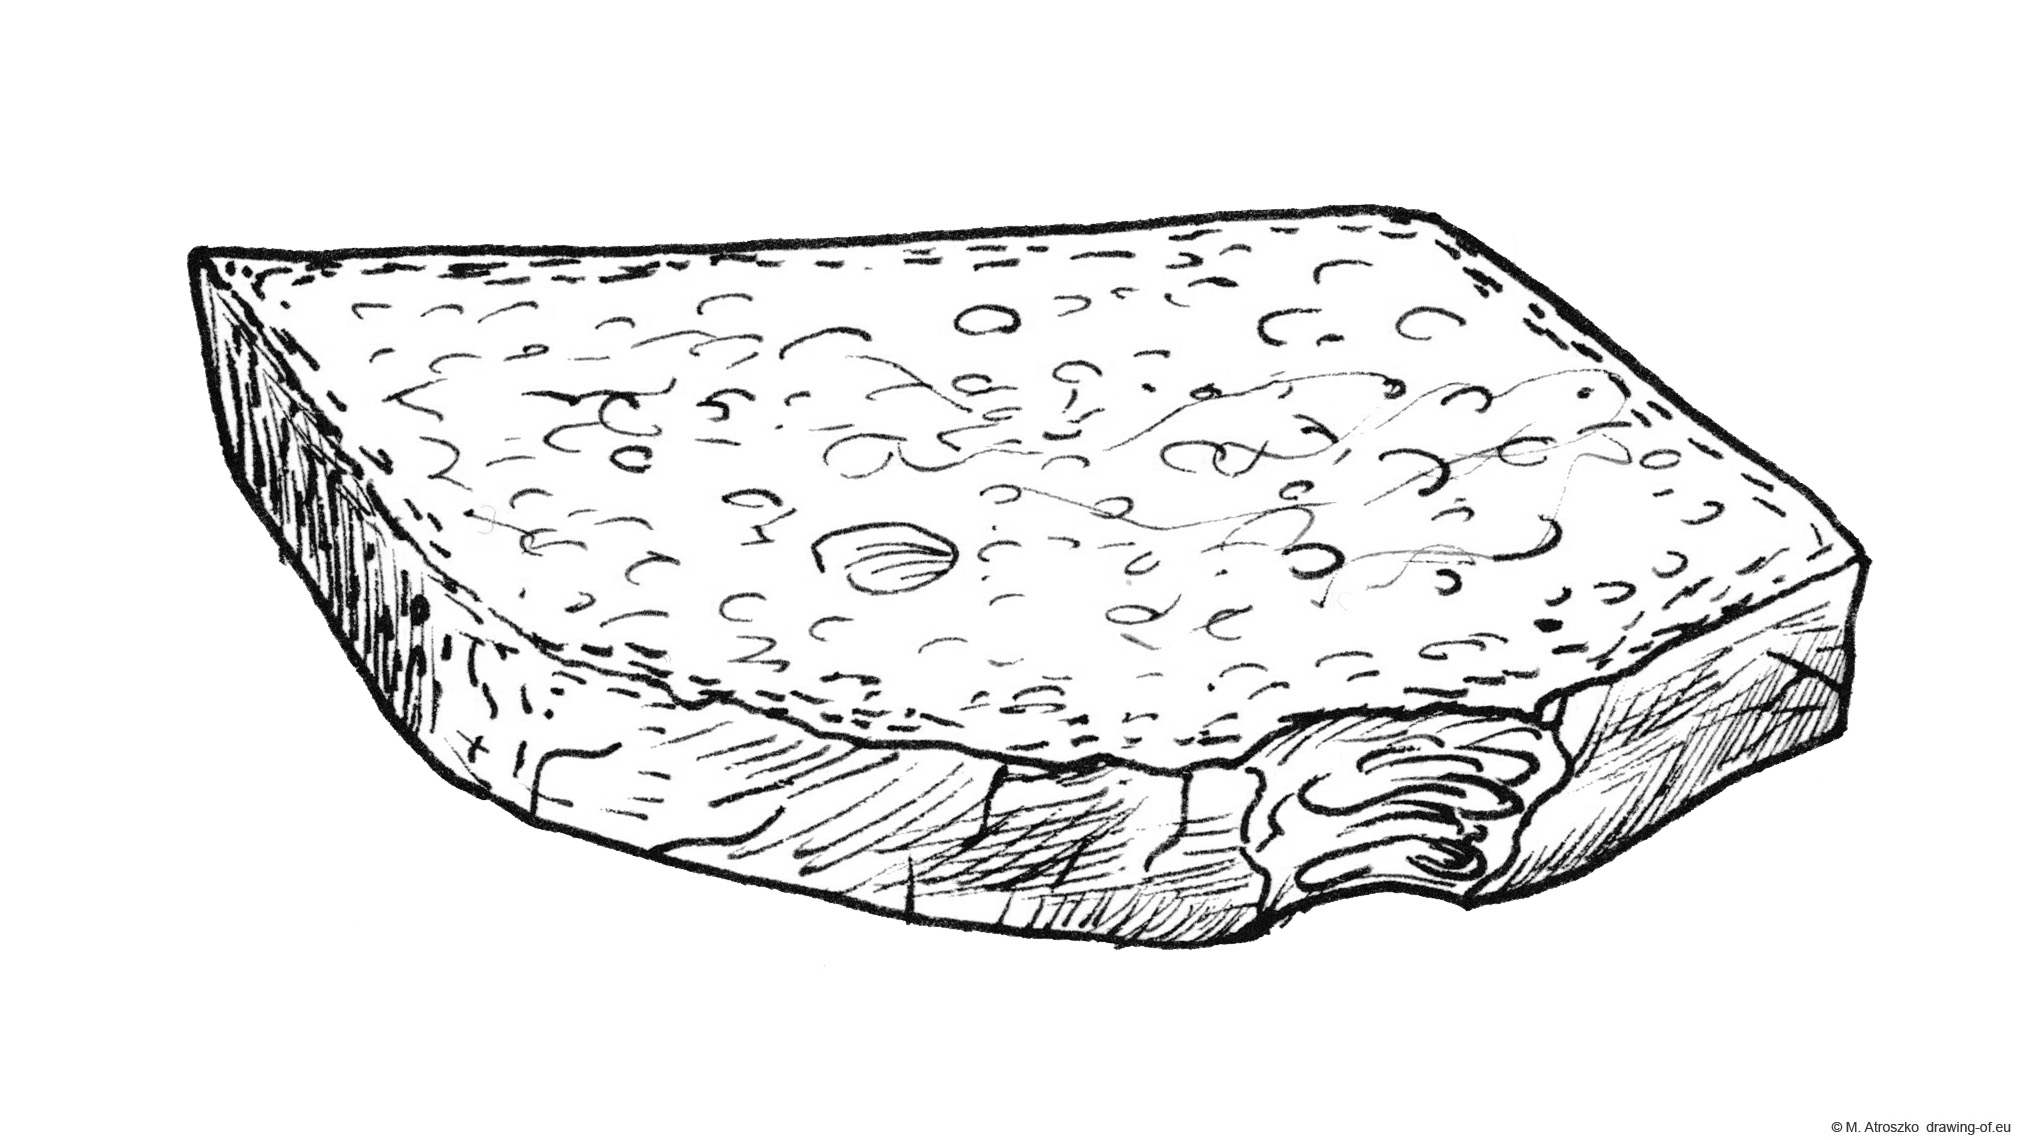 Slice of bread drawing